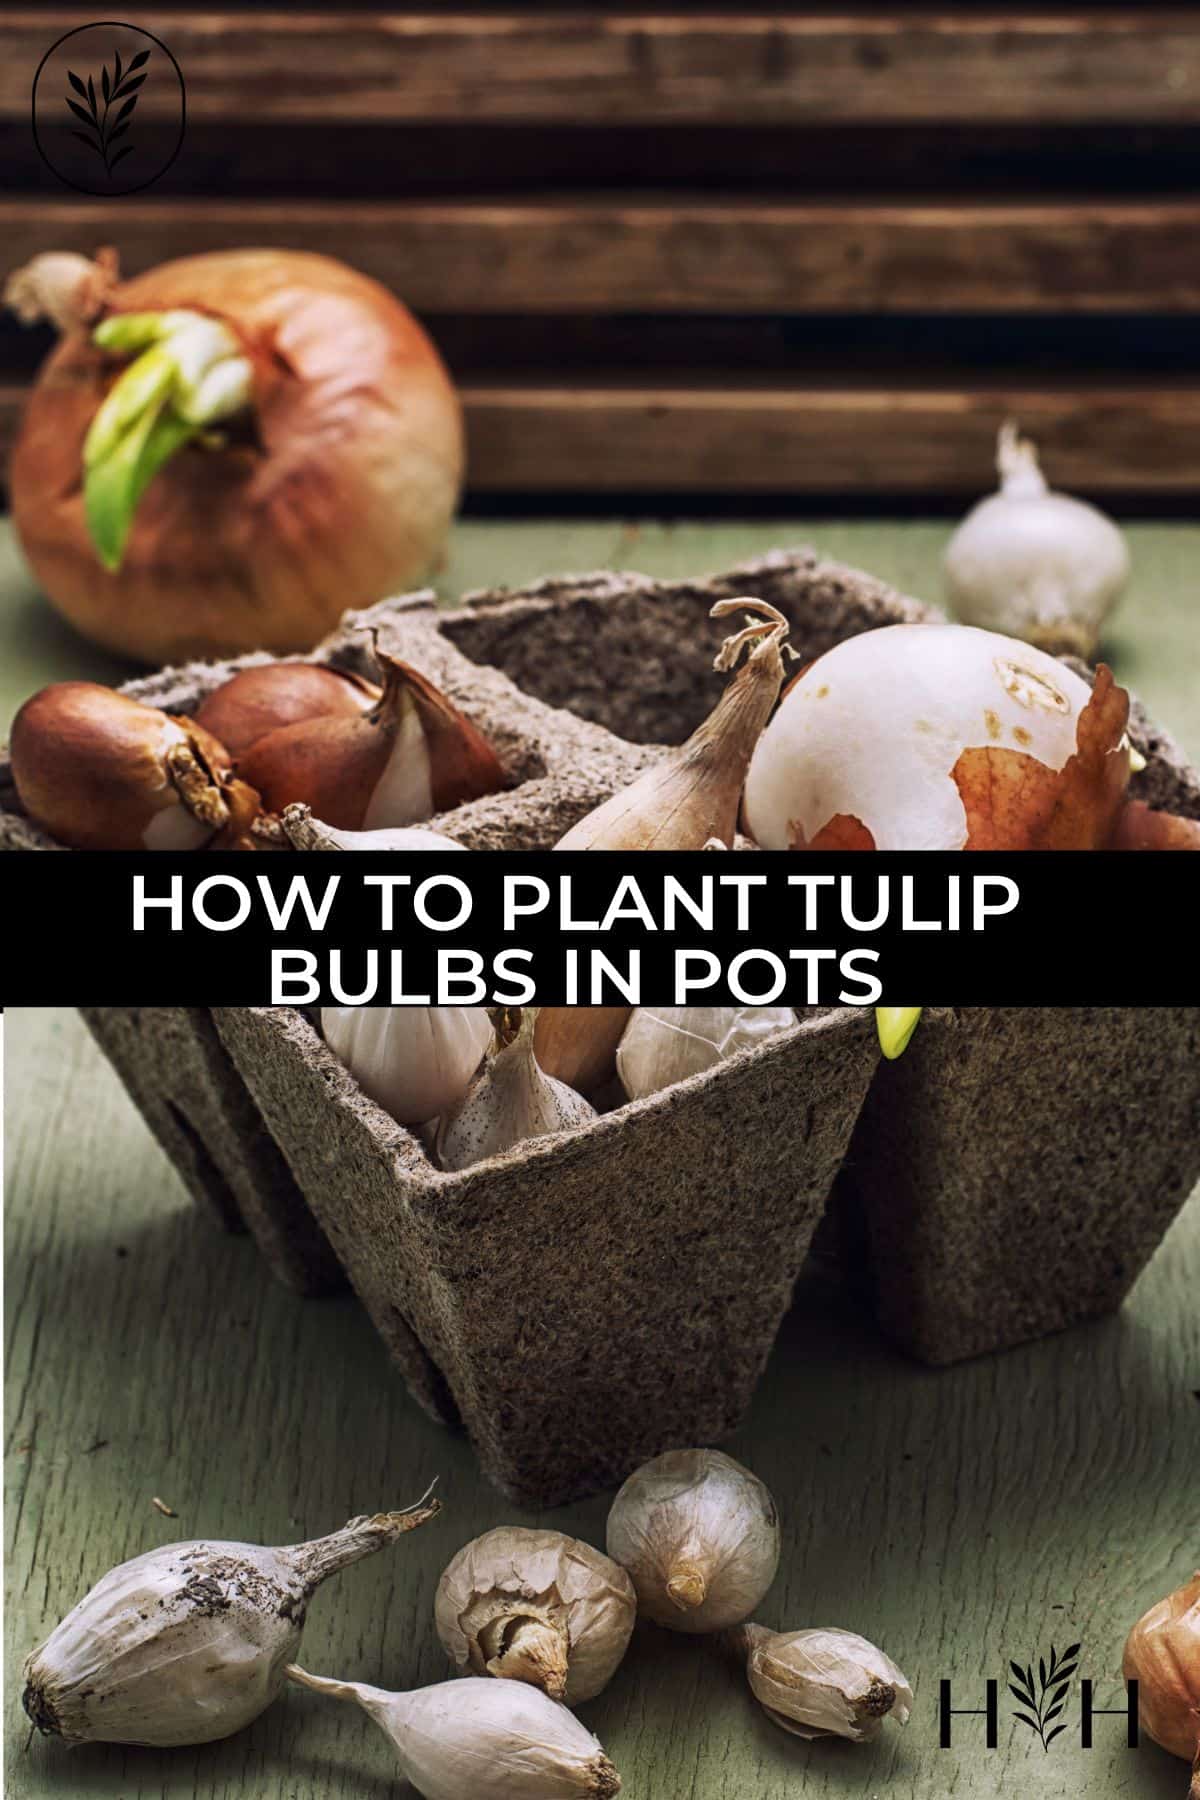 How to plant tulip bulbs in pots via @home4theharvest